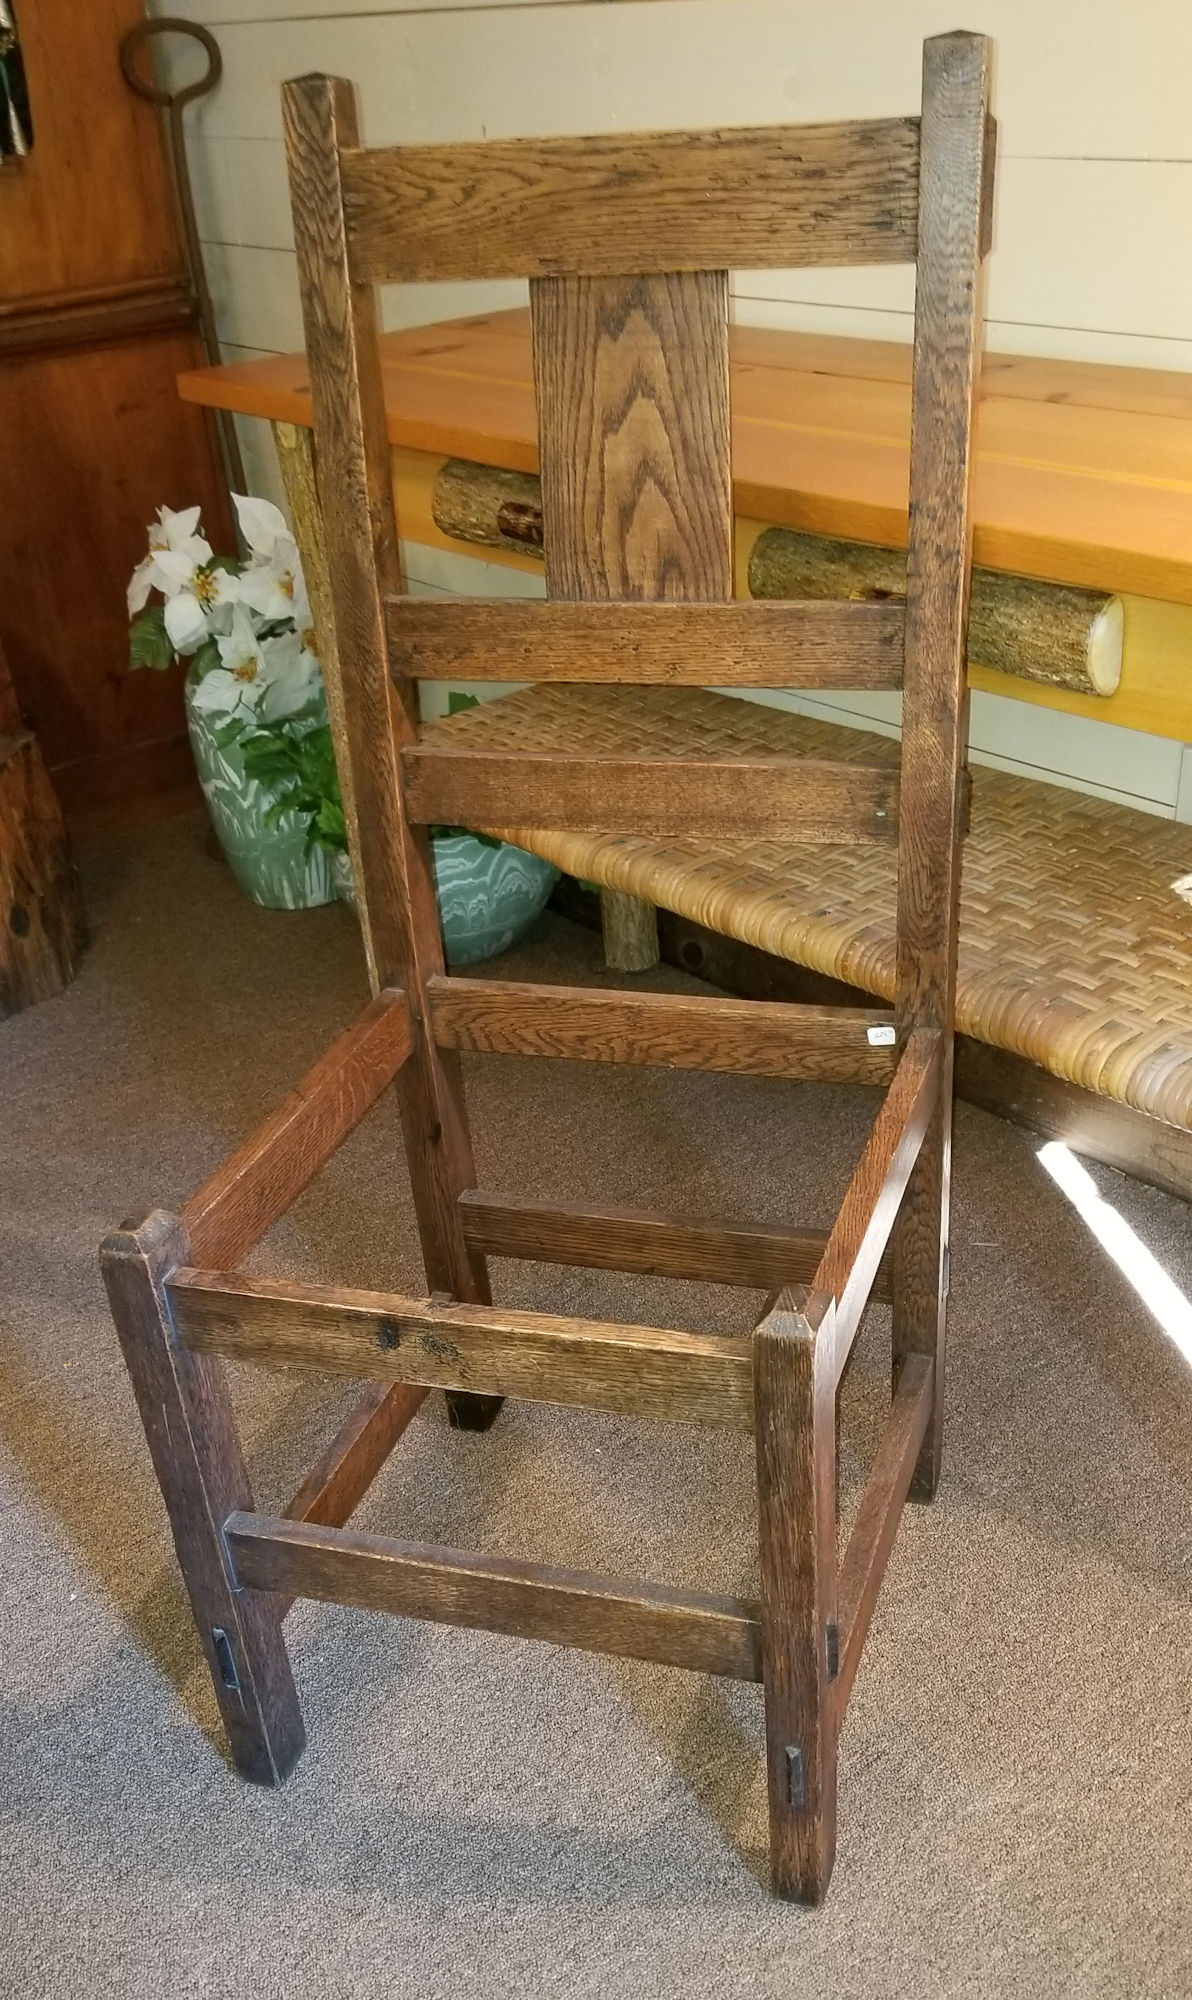 Craftsman Guild Mission Oak
                                        Mortise and Tenon Side Chair
                                        1910 - 1915